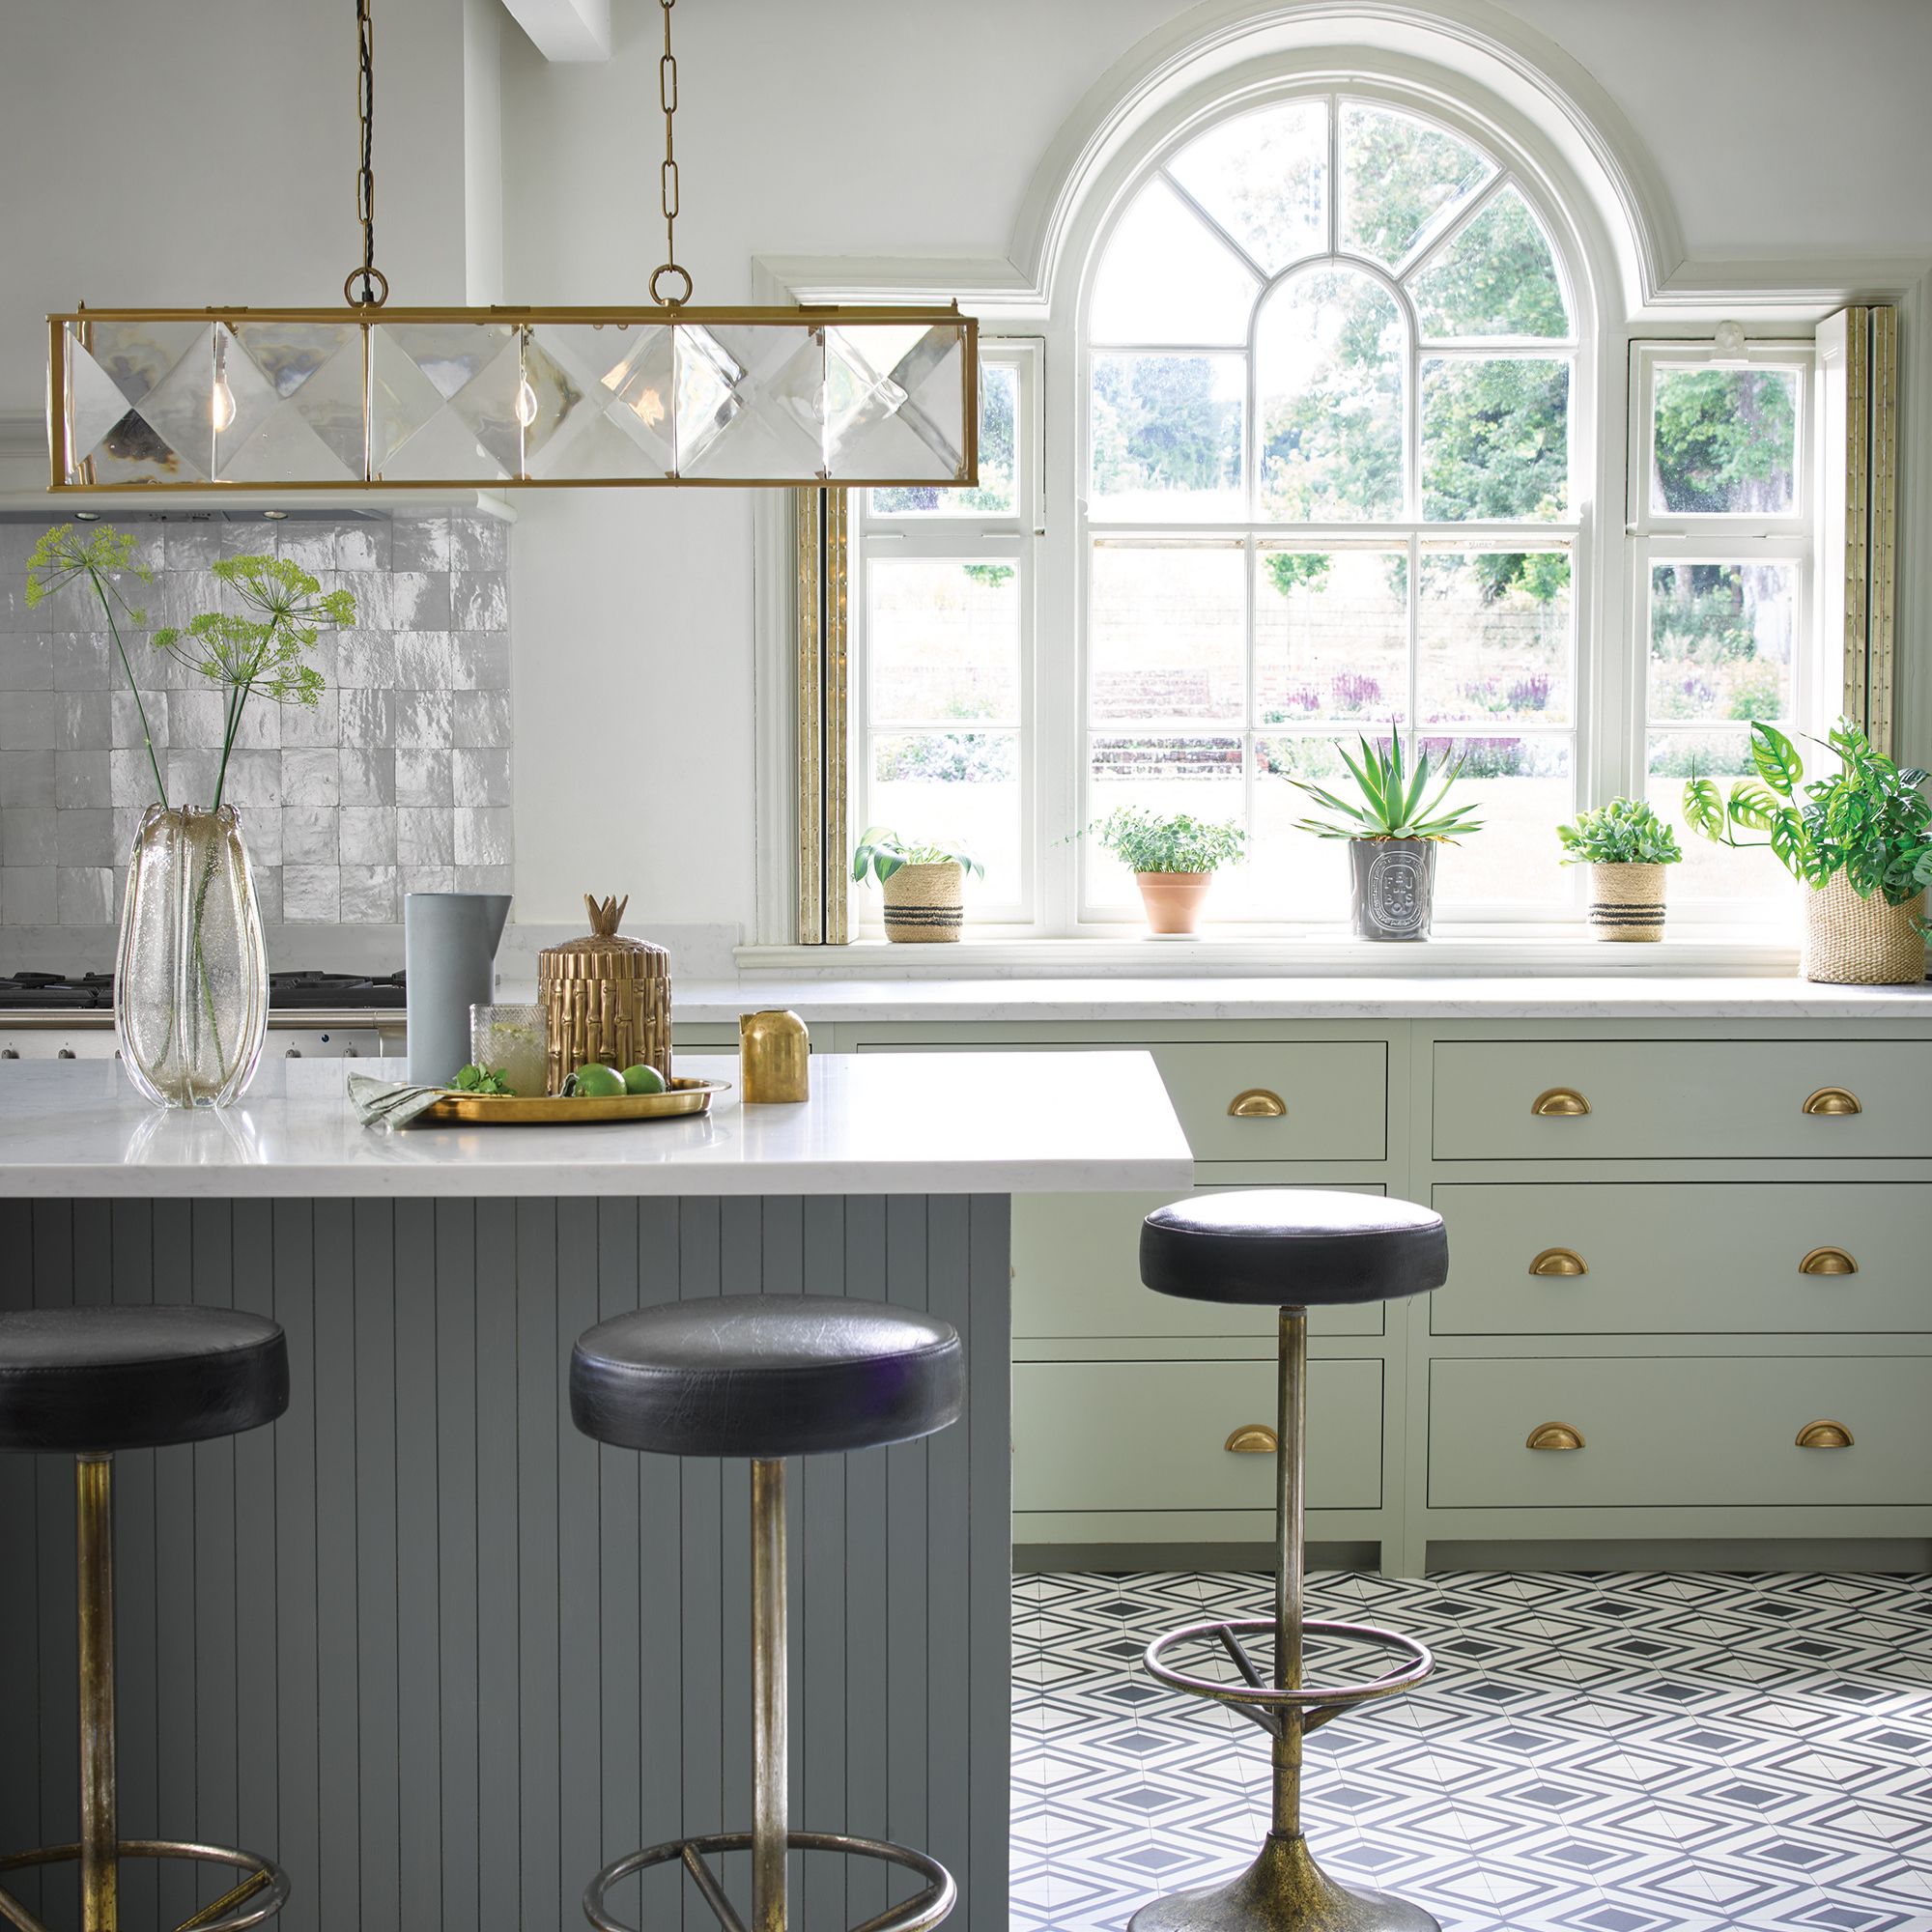 pendant light above isladn in grey and green kitchen with feature window and upholstered bar stools